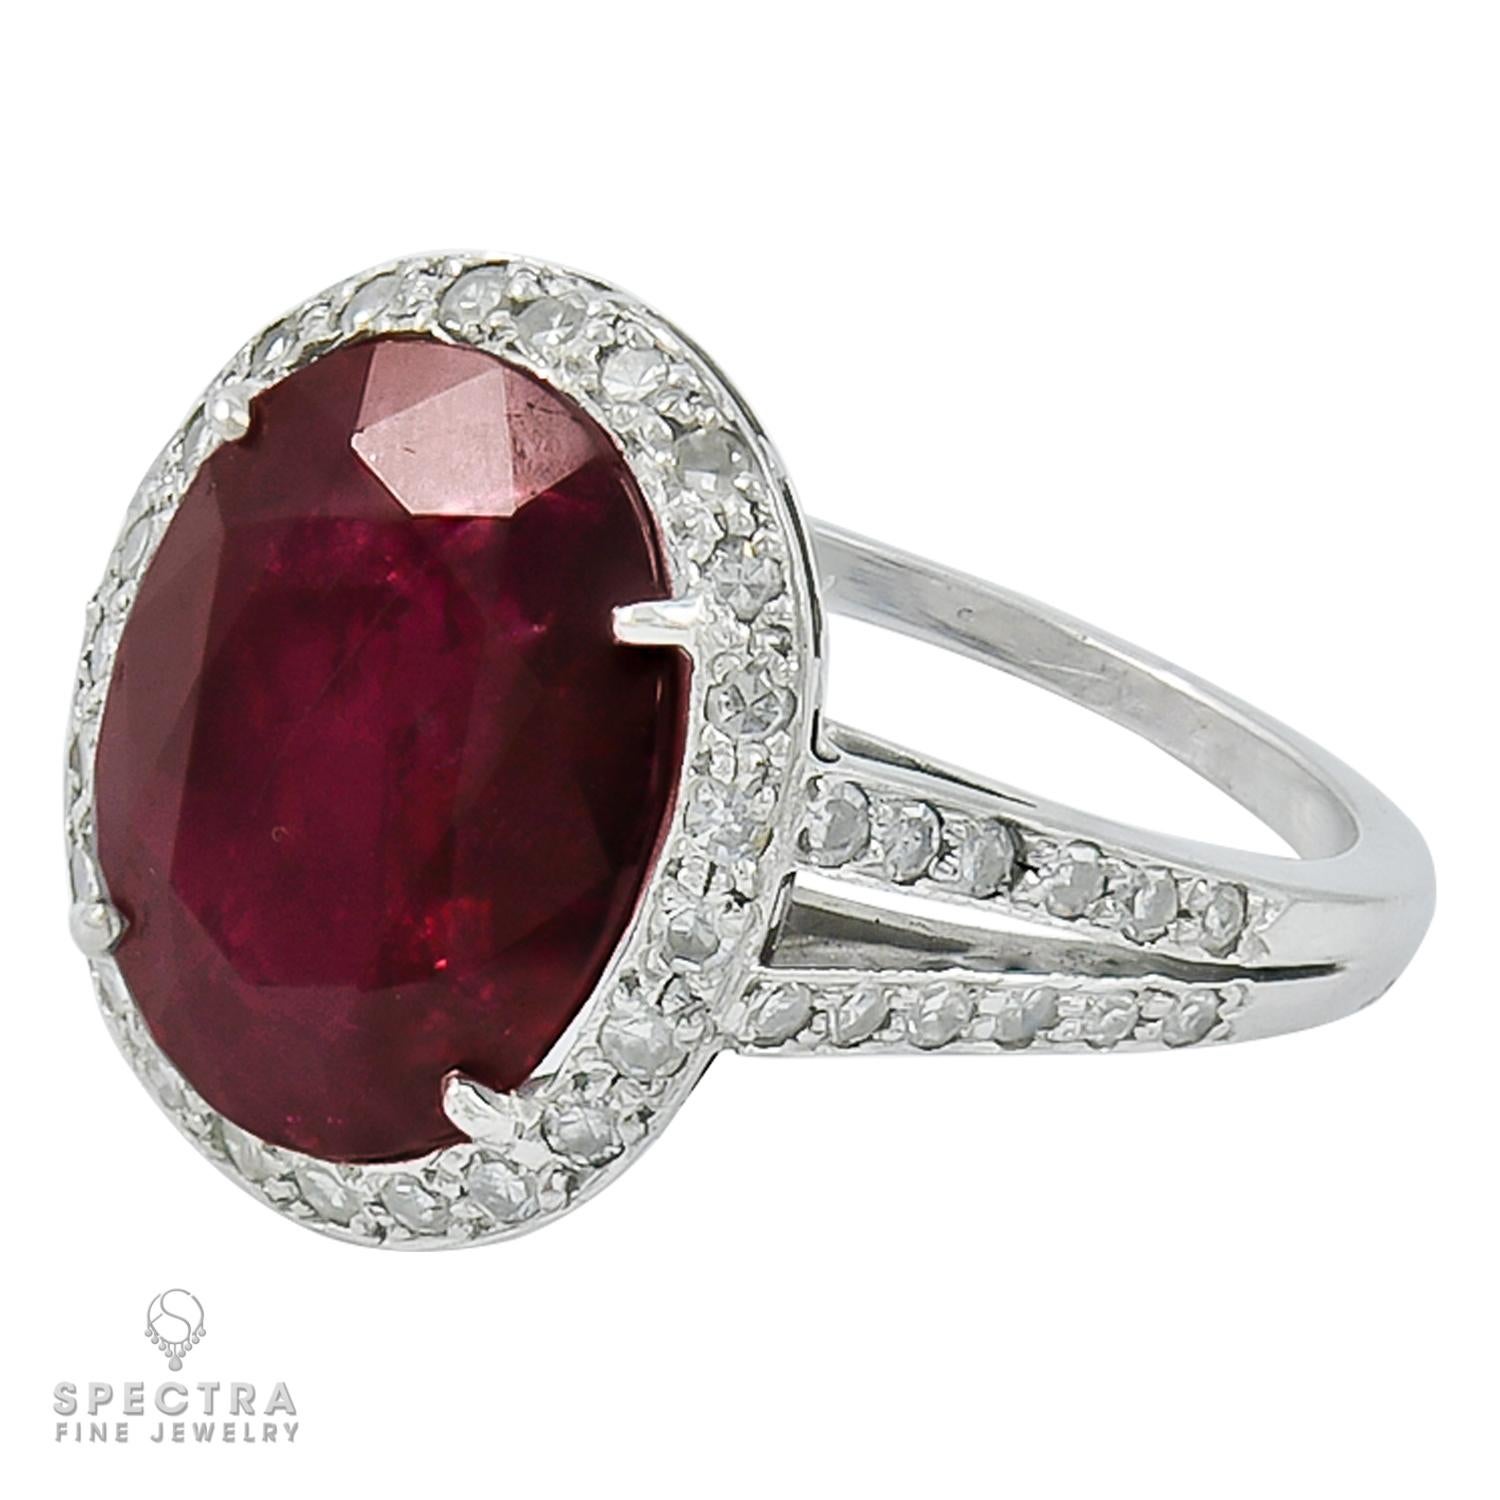 Even though the deep, rich color of a ruby is an emblem of love and passion, it is still a rare choice for an engagement ring. A few stars sport them, yes, like Eva Longoria, Katy Perry, and Victoria Beckham, raising their profile. The ruby scores a